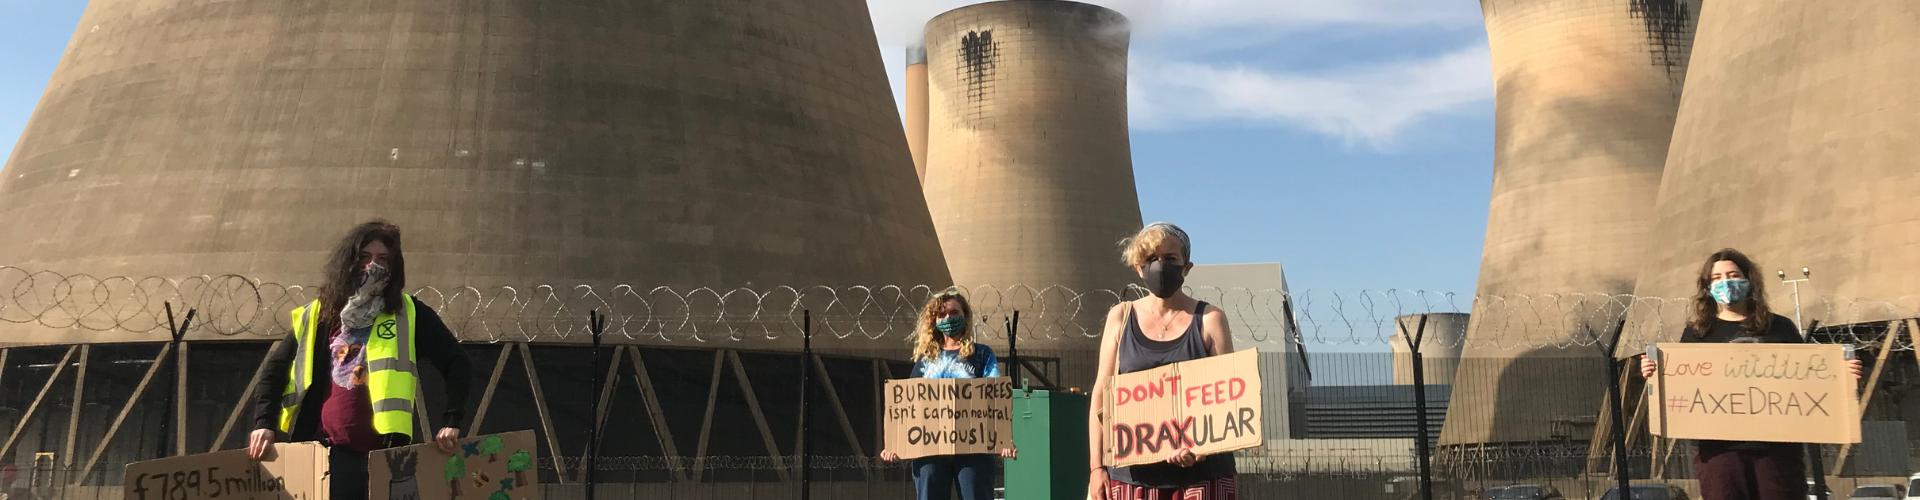 Protestors in front of Drax' UK power station where it burns forests from places like B.C. for electricity